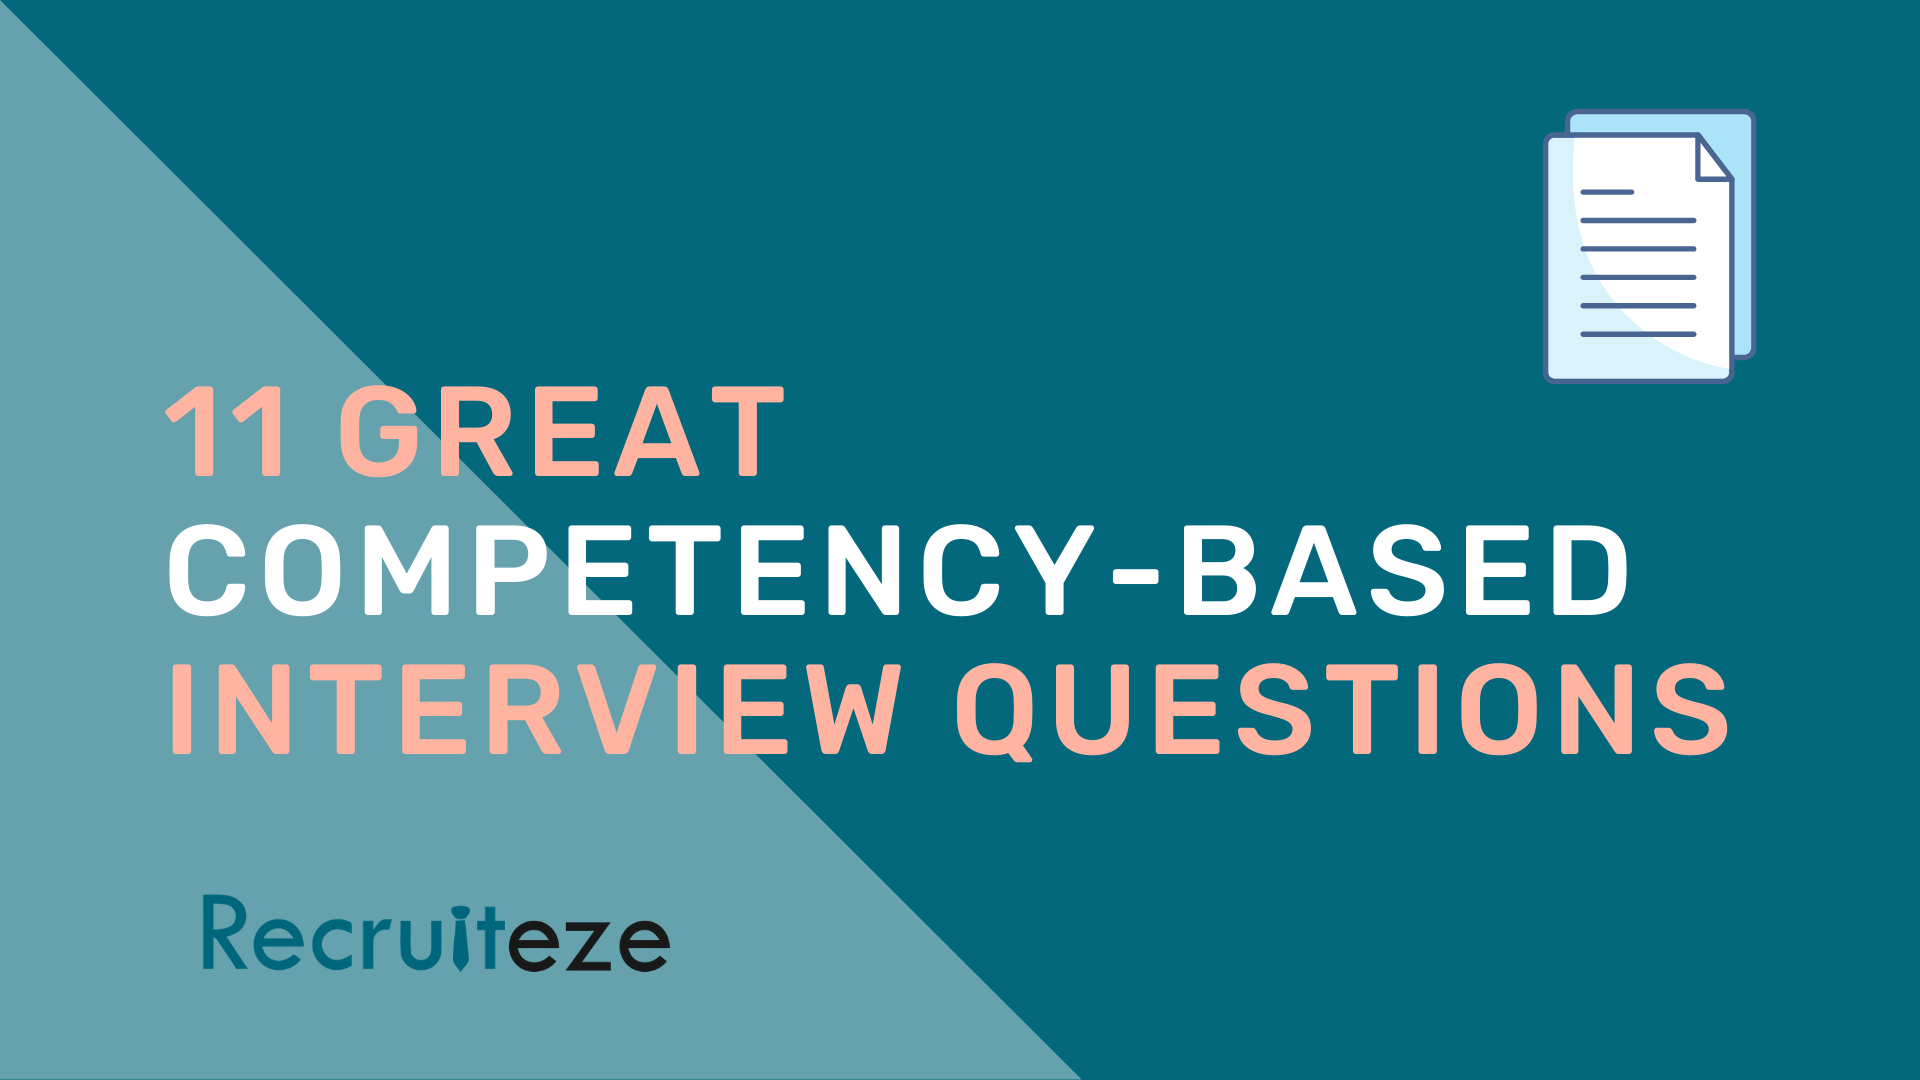 11 Great Competency-Based Interview Questions